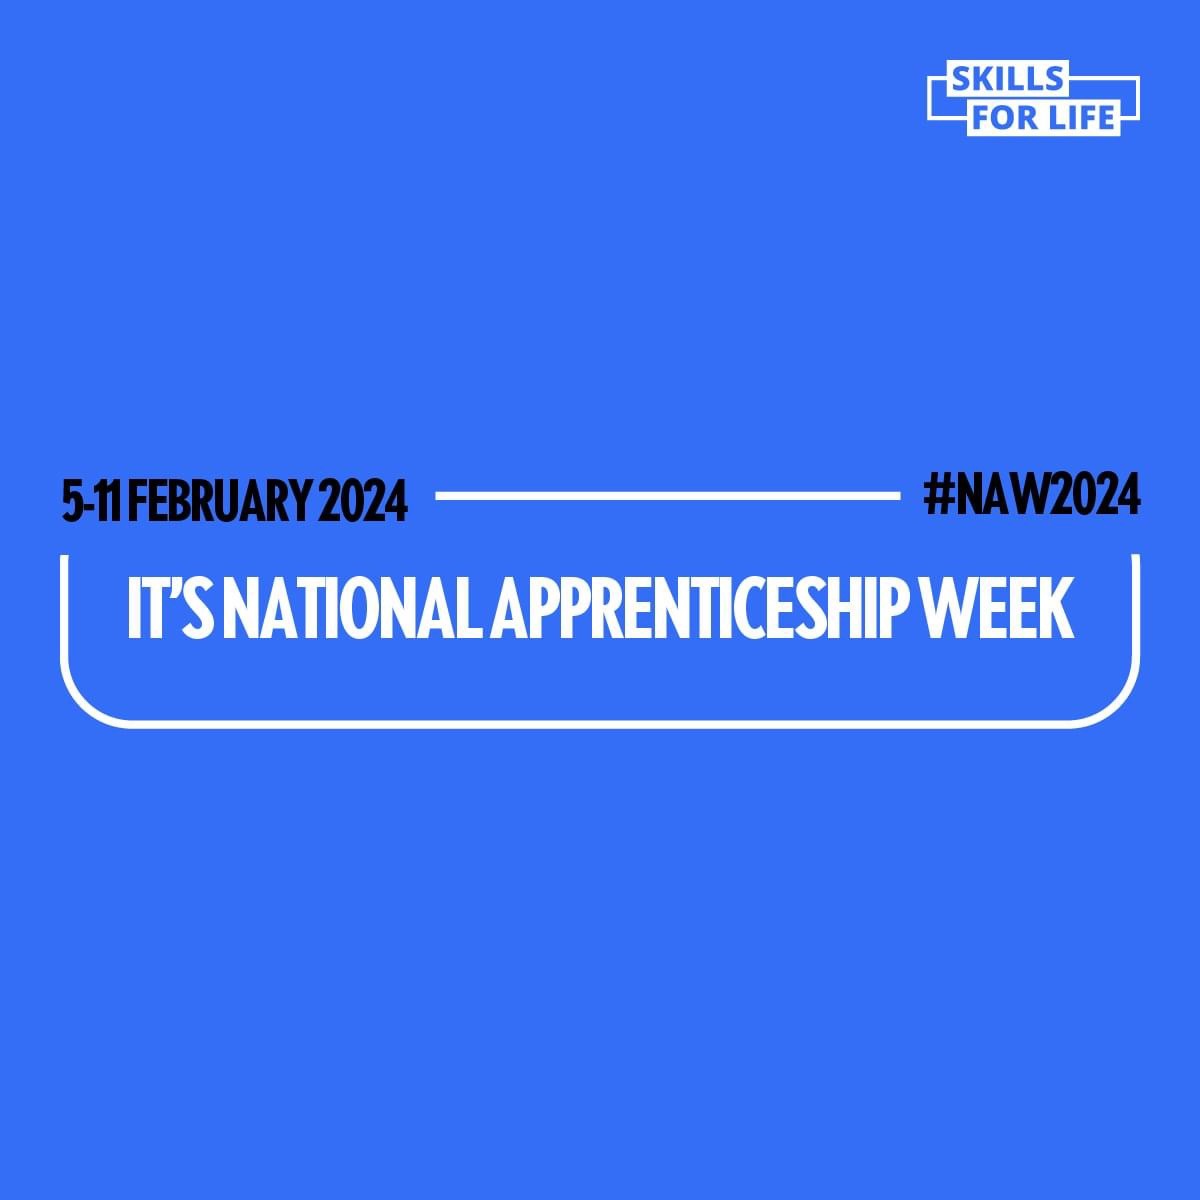 It's #NationalApprenticeshipWeek 🎓 This week we will be celebrating some of our apprentices to showcase the value, benefit and opportunity that apprenticeships bring. Interested in a Apprenticeship? Apply now 💻 baesystems.com/earlycareers #SkillsForLife #NAW2024